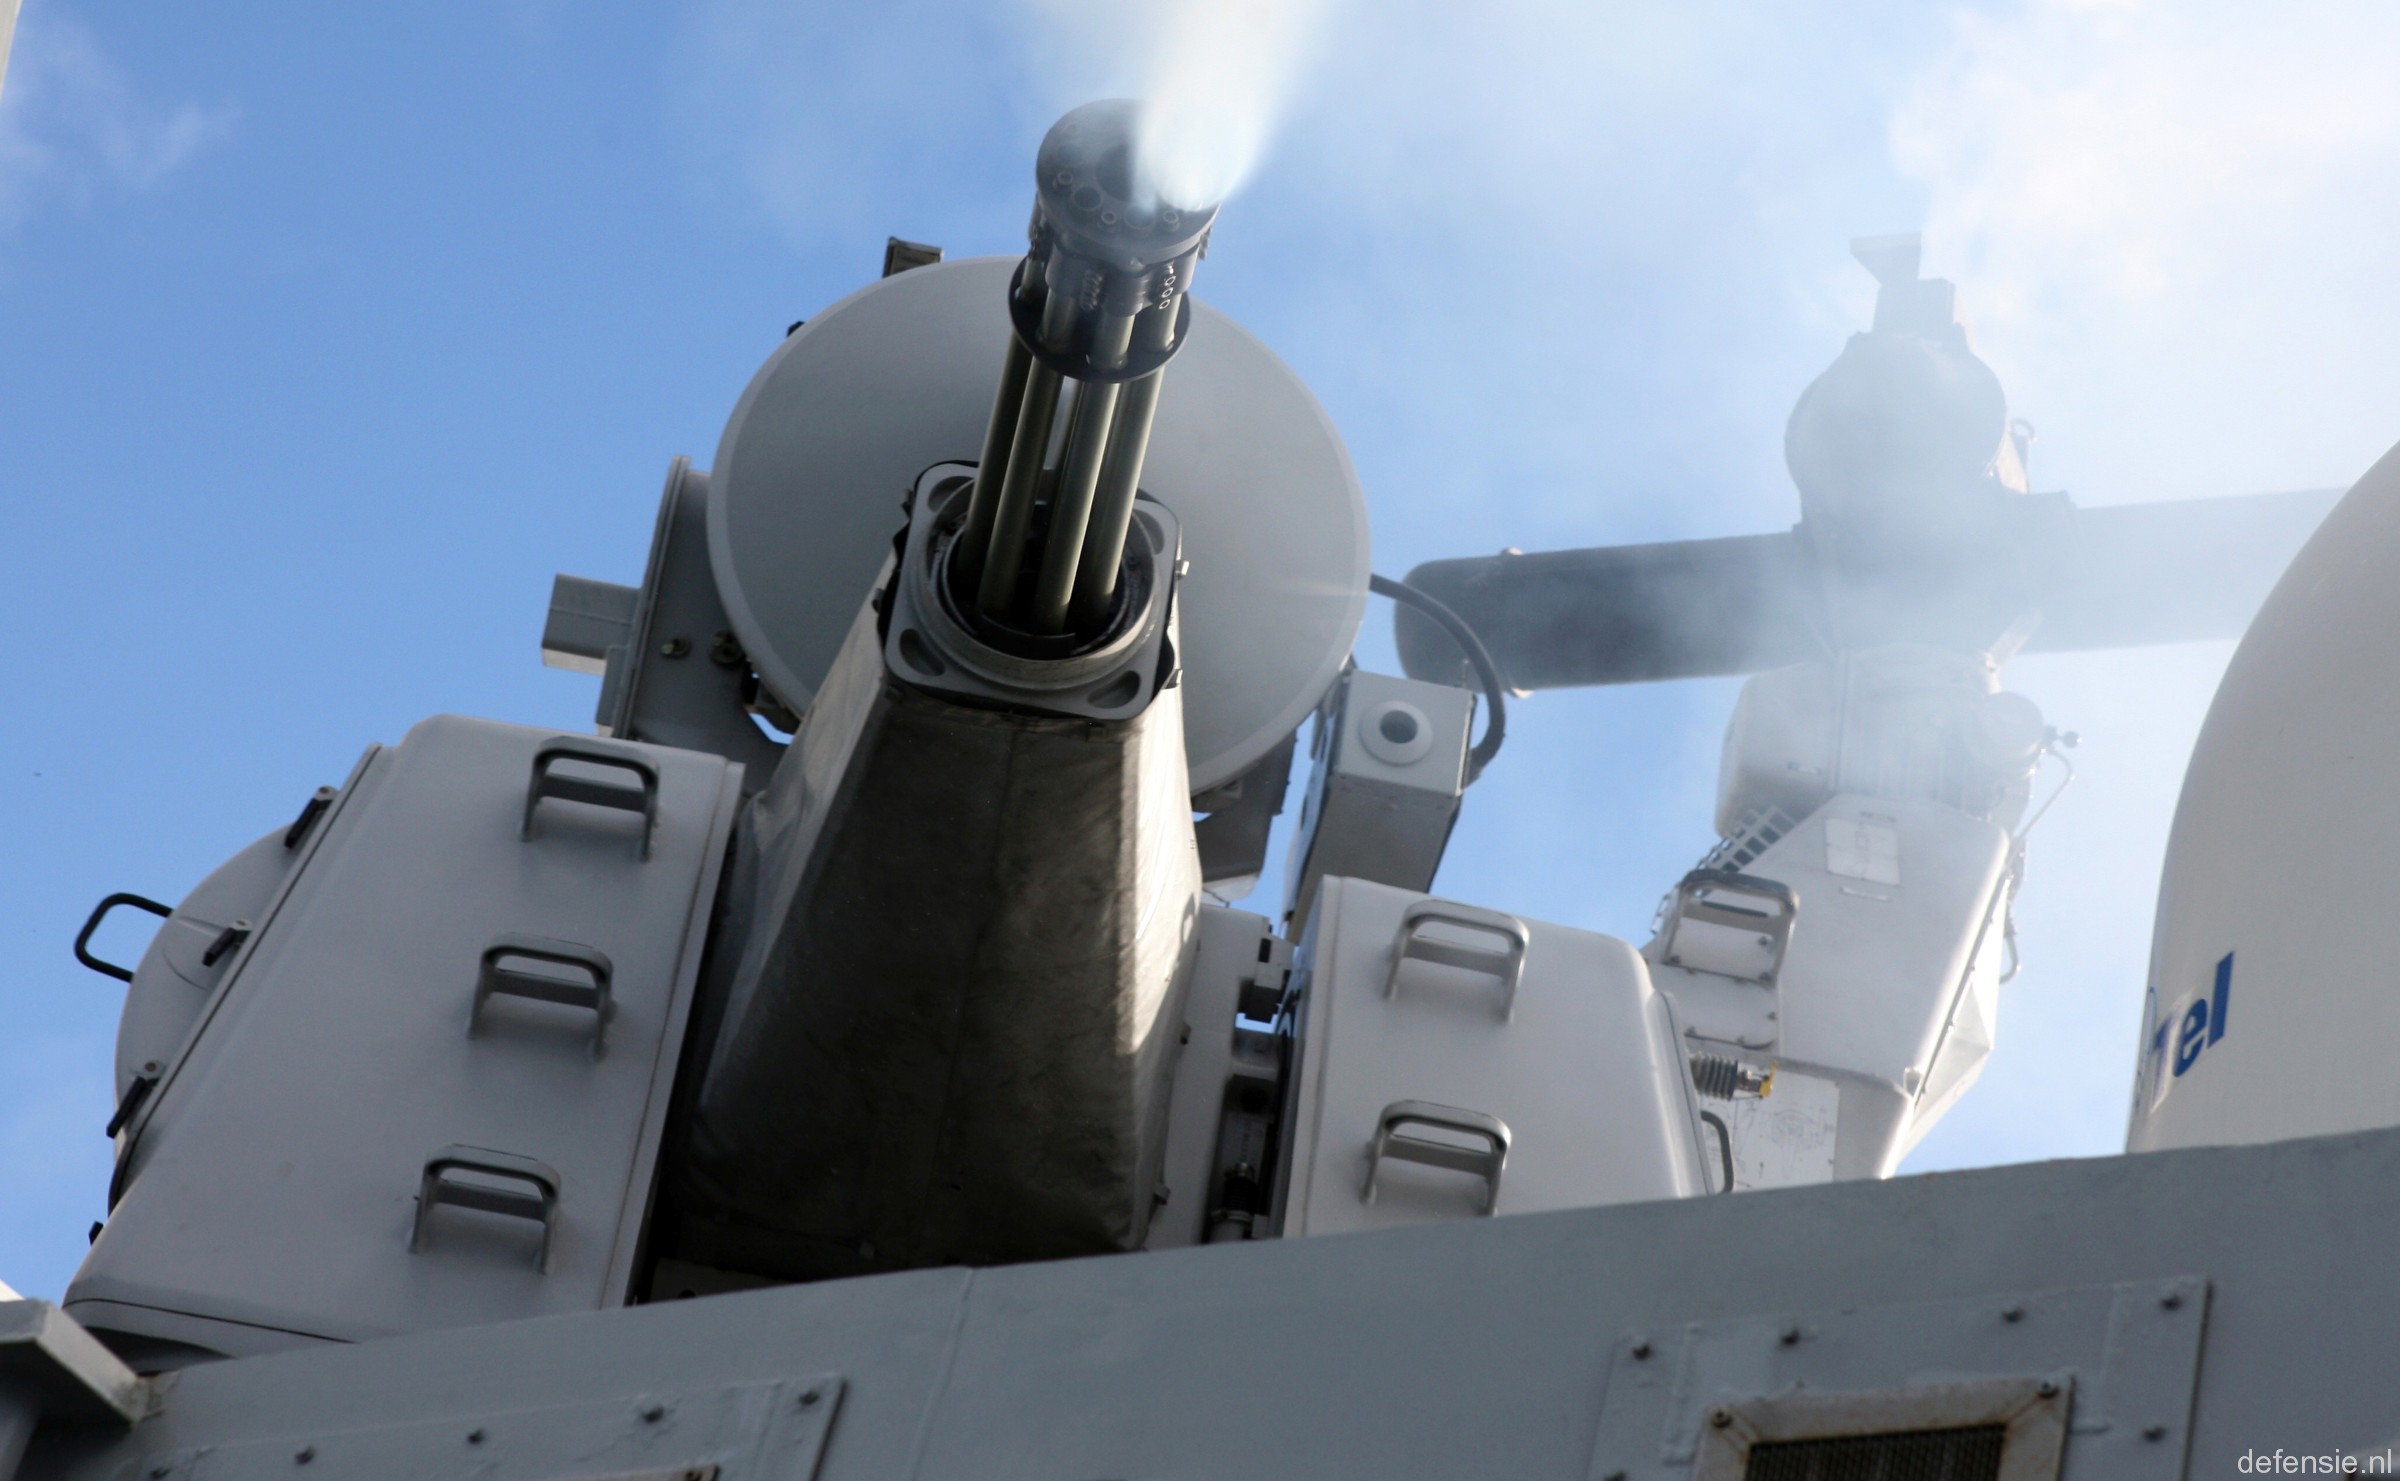 goalkeeper close-in weapon system ciws 30mm thales navy 08